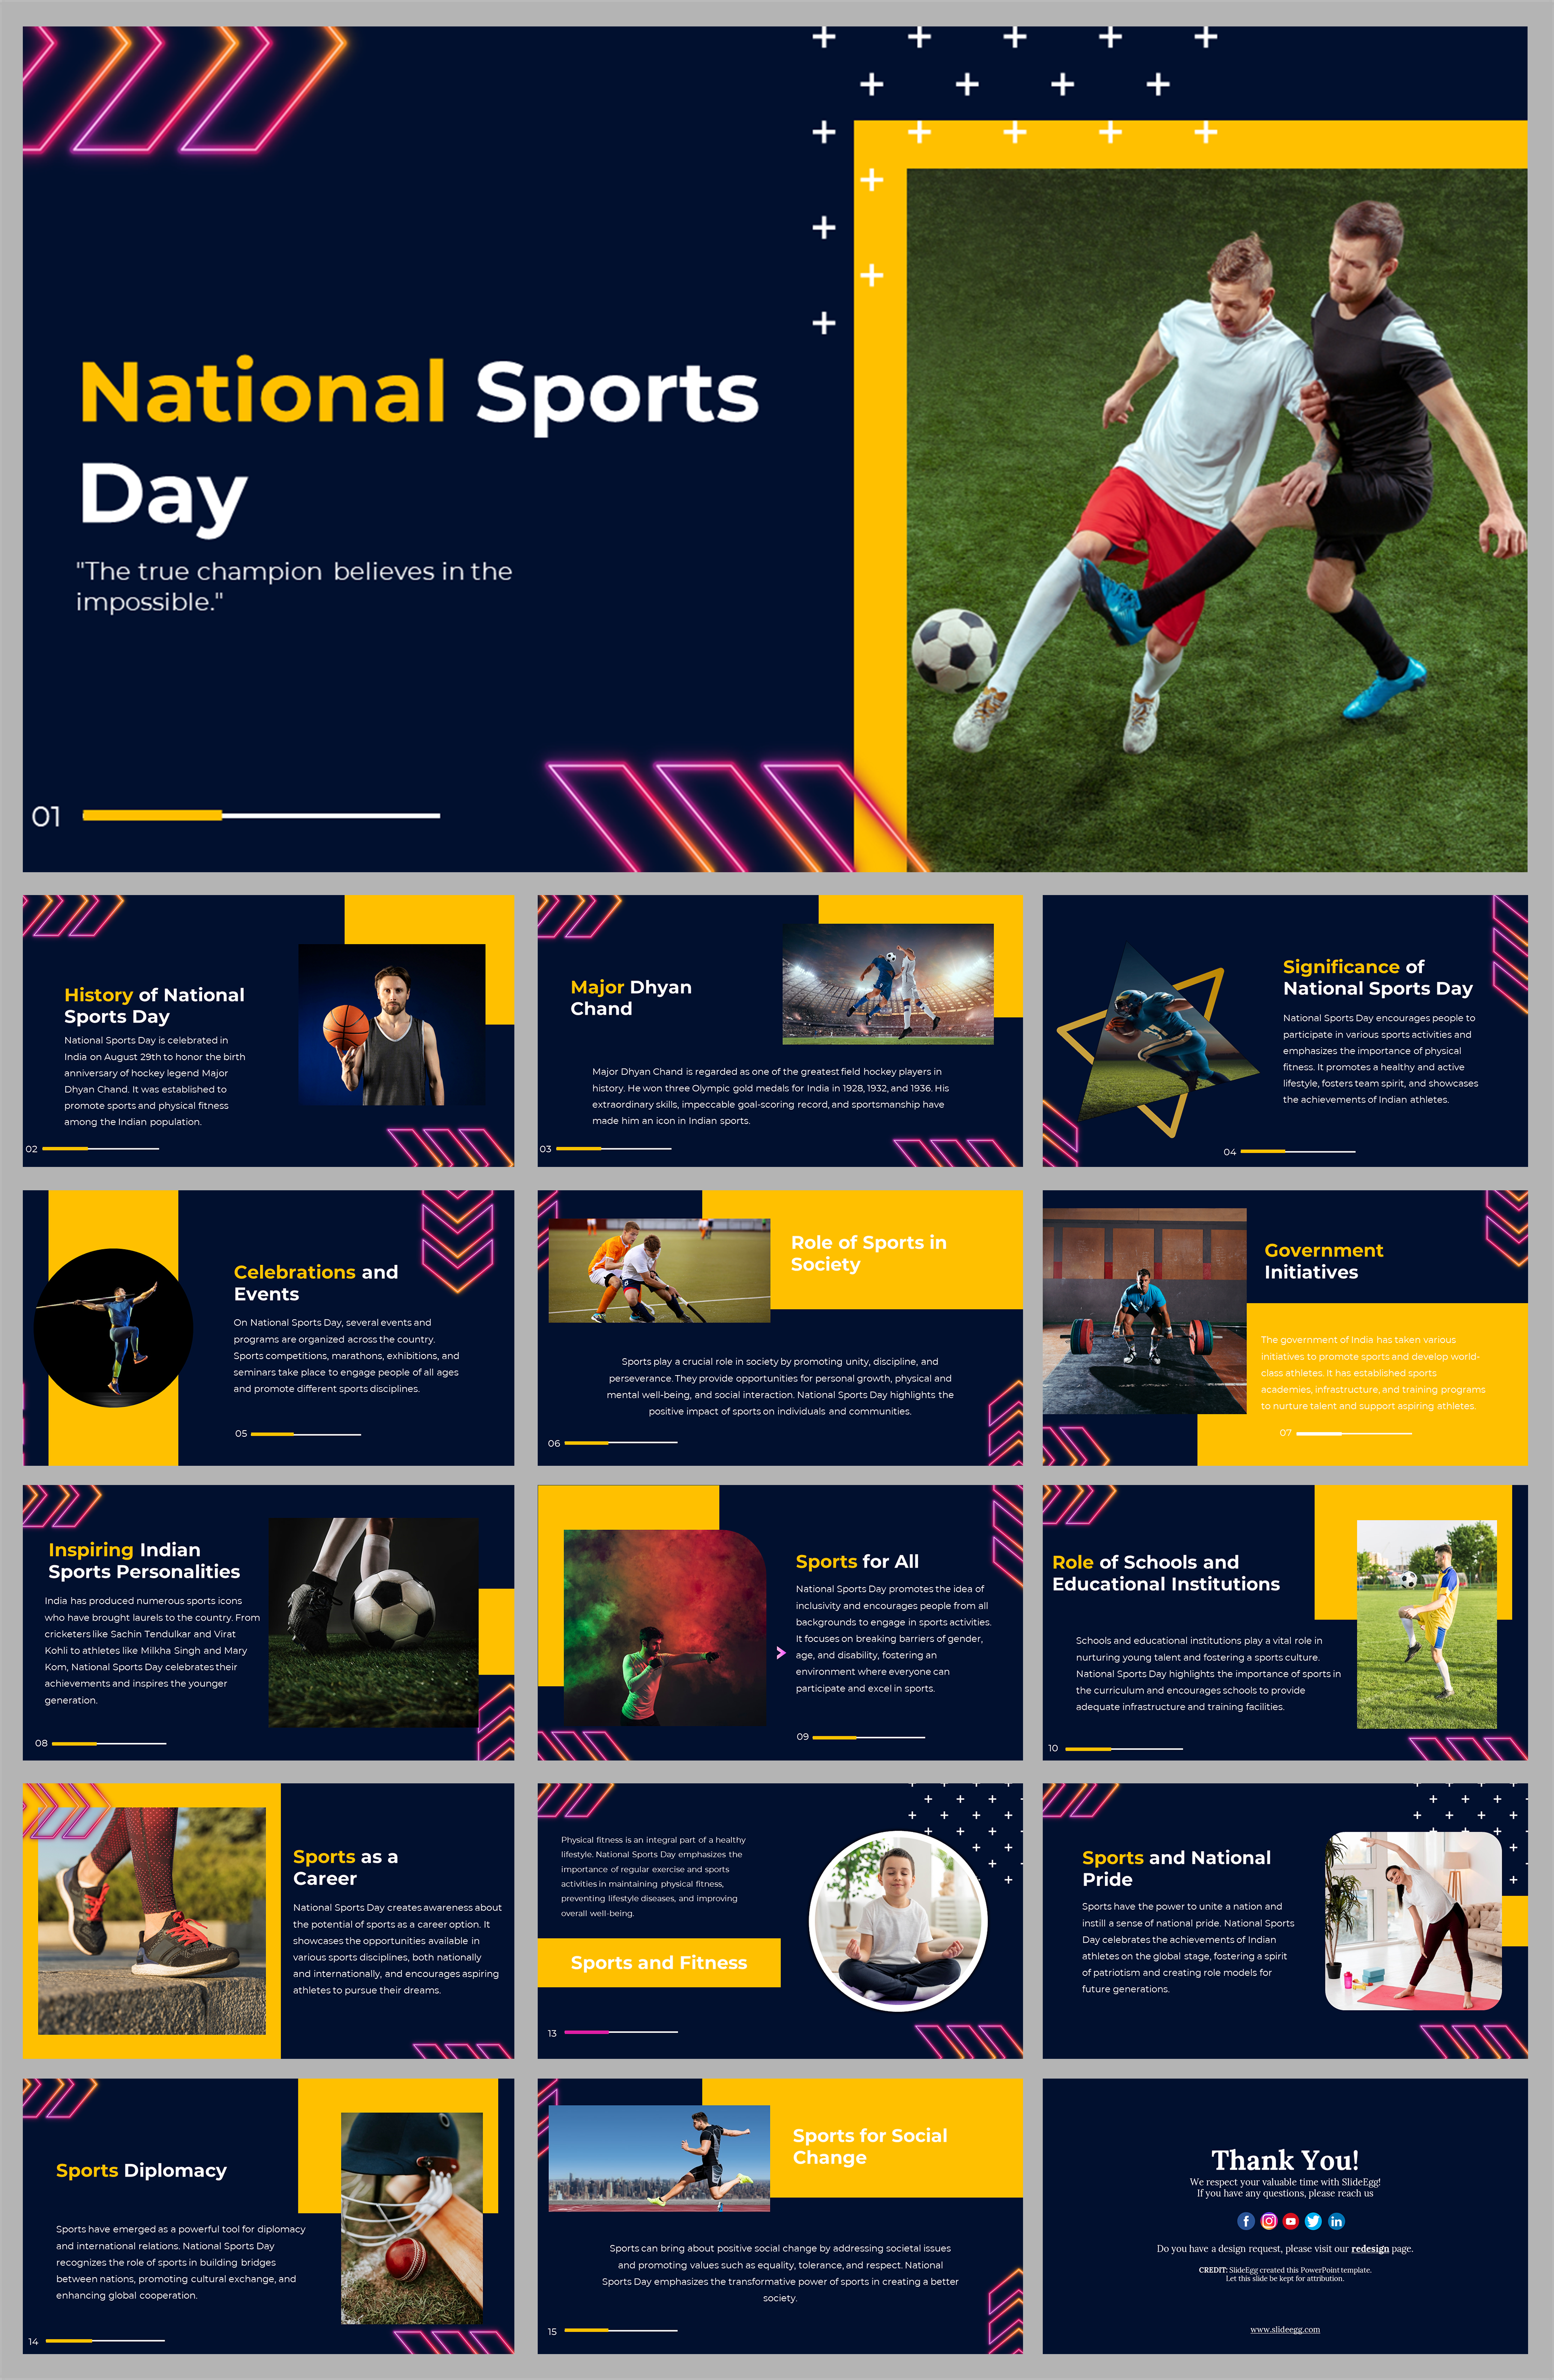 sports day background for powerpoint